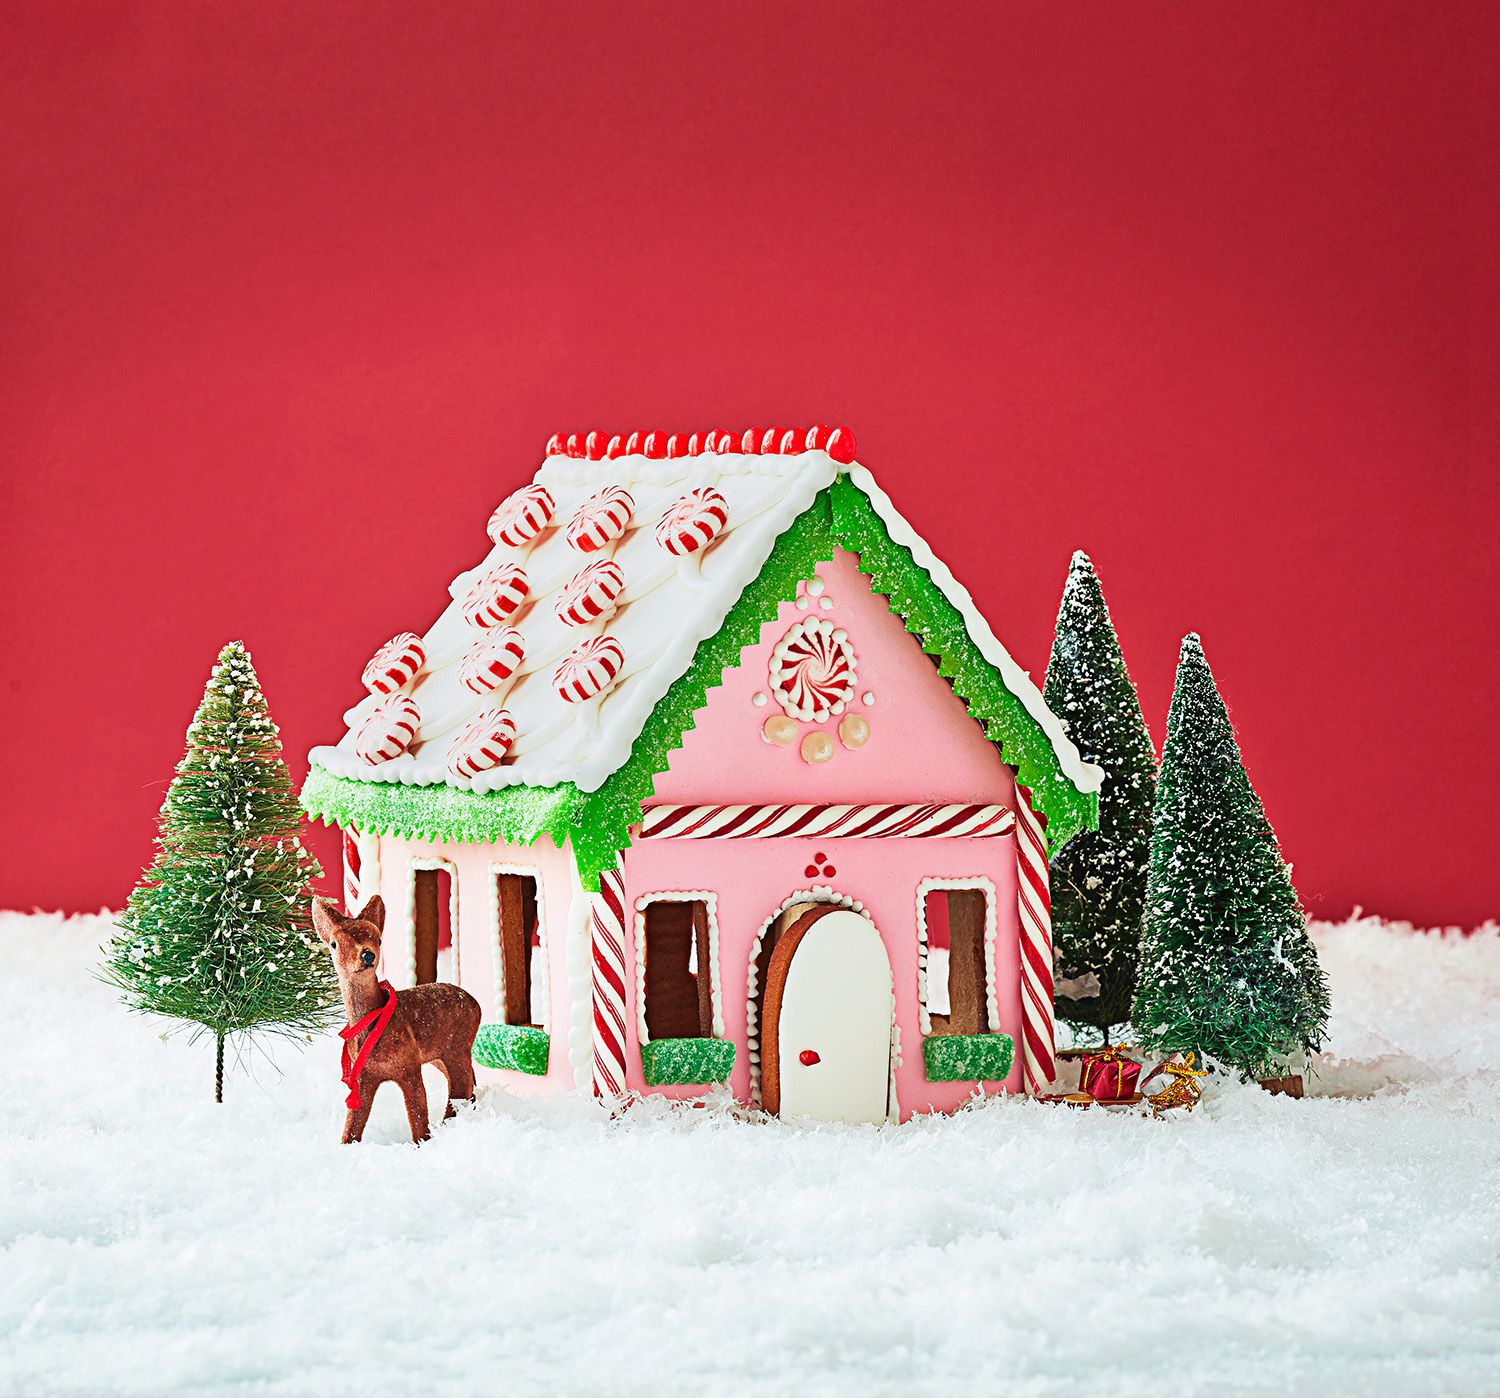 64 Great Christmas Activities For Kids, Adults, and Families